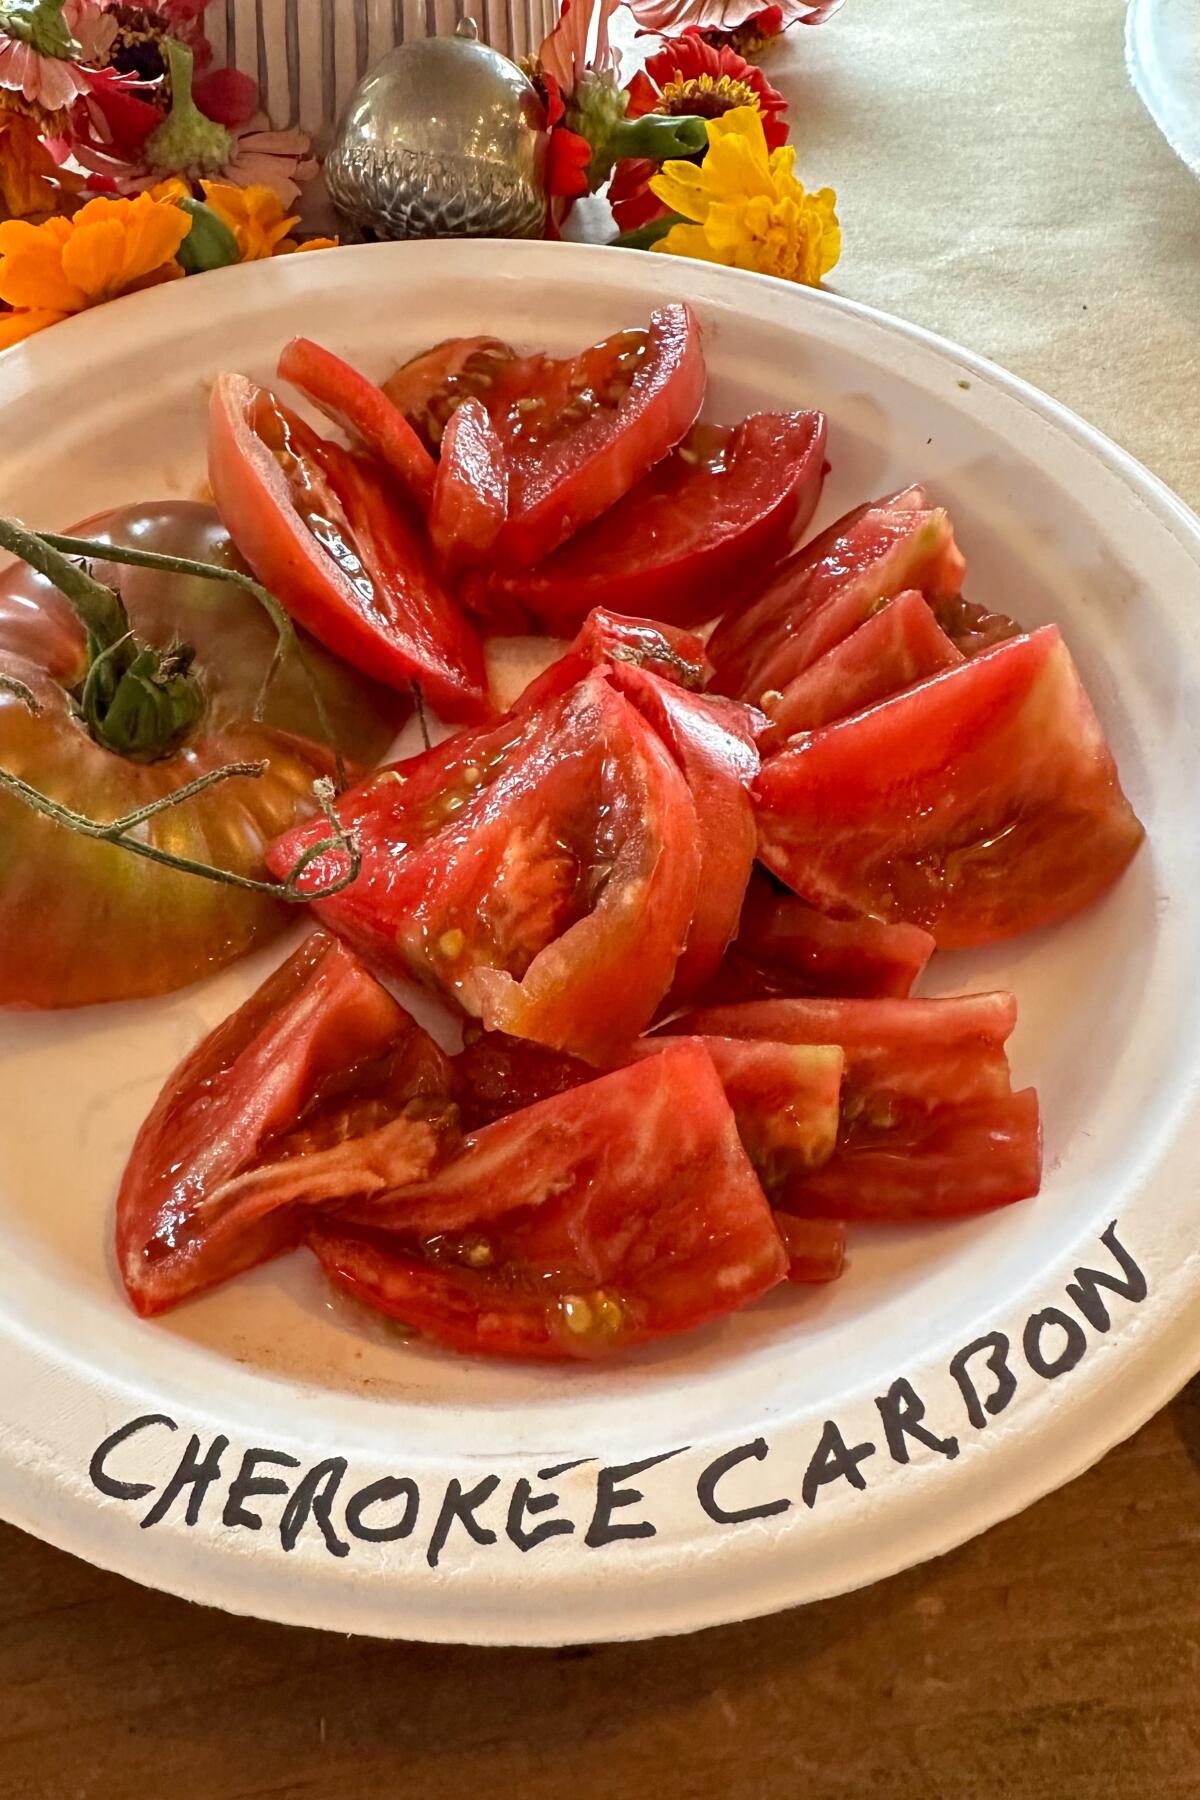 Red Cherokee Carbon tomatoes sliced on a labeled paper plate. 